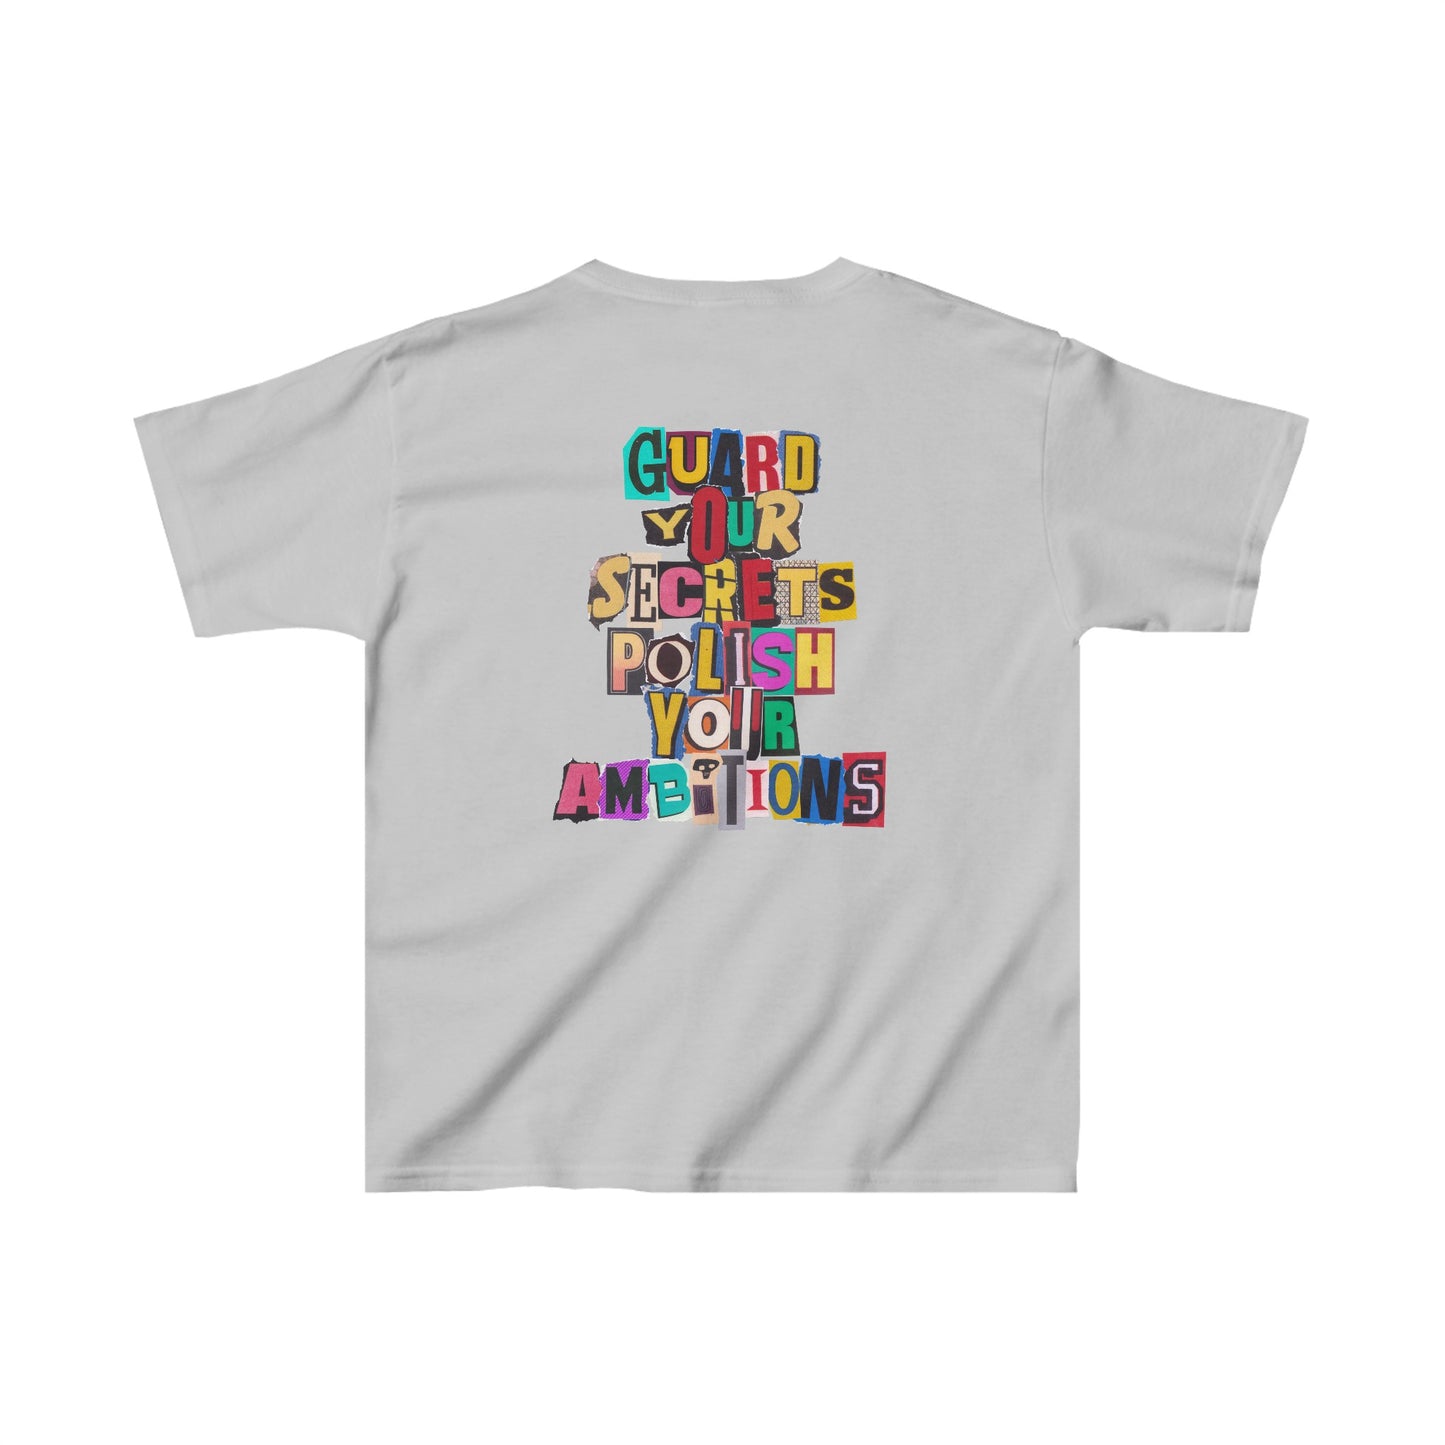 Youth WIY x Mitchell Vintage T-Shirt